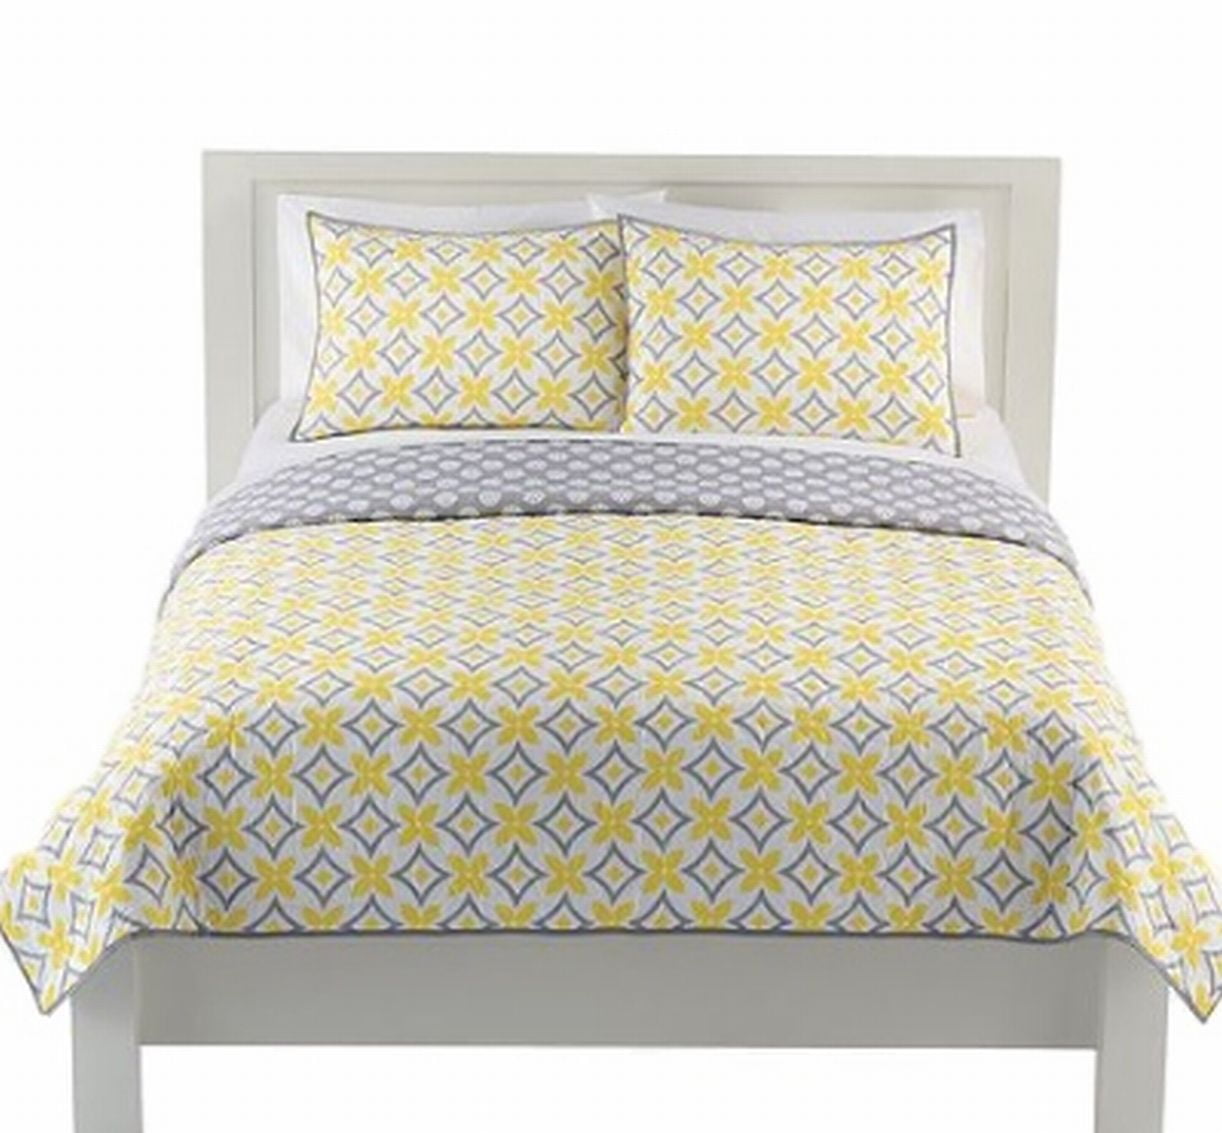 Reversible Quilt Sham Set Yellow, Yellow And Gray Twin Bedding